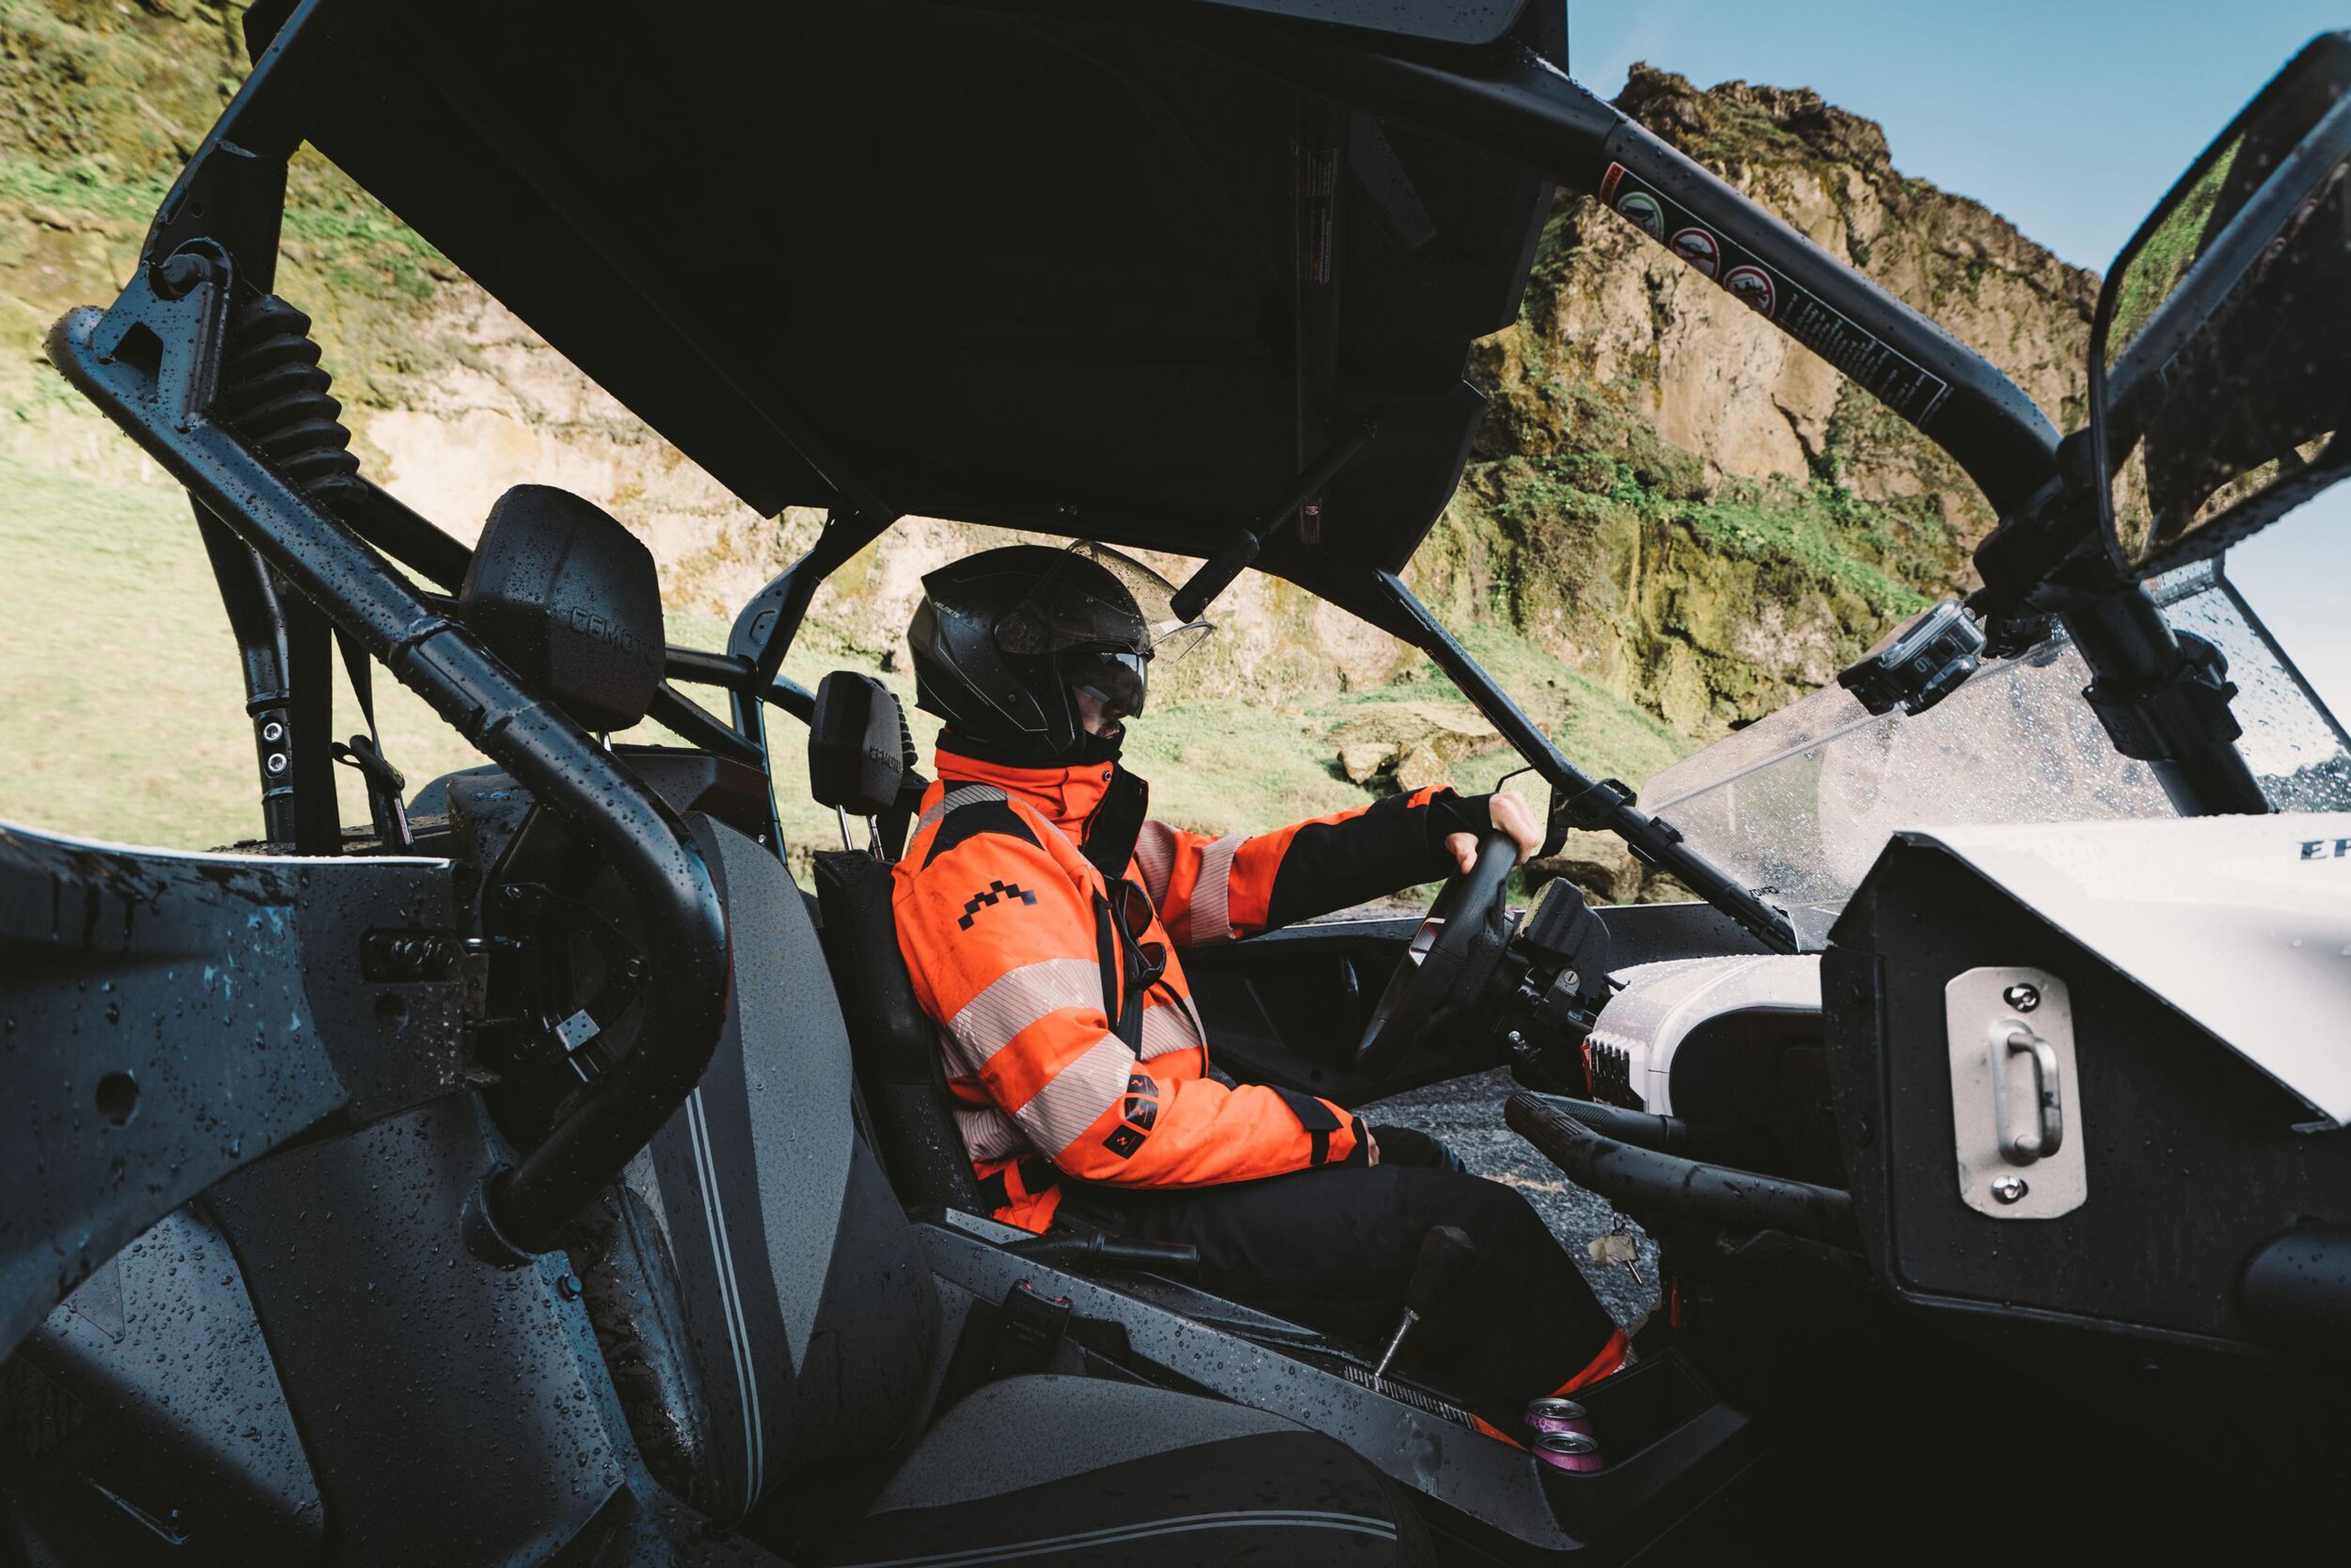 A view from inside an off-road vehicle, showing a driver in a high-visibility orange jacket and helmet, focused on driving